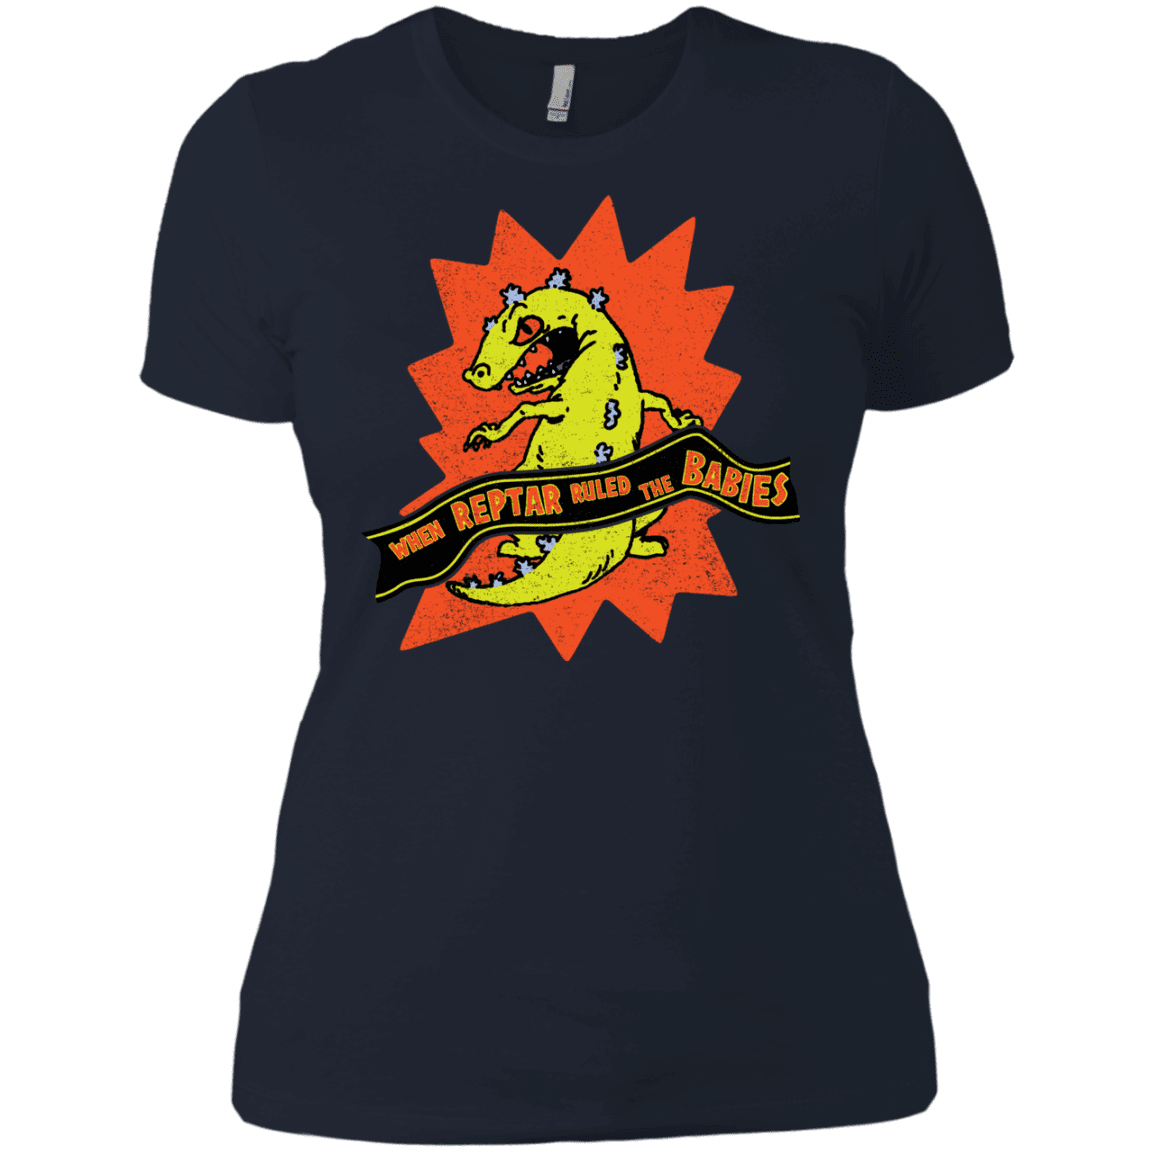 T-Shirts Midnight Navy / X-Small When Reptar Ruled The Babies Women's Premium T-Shirt